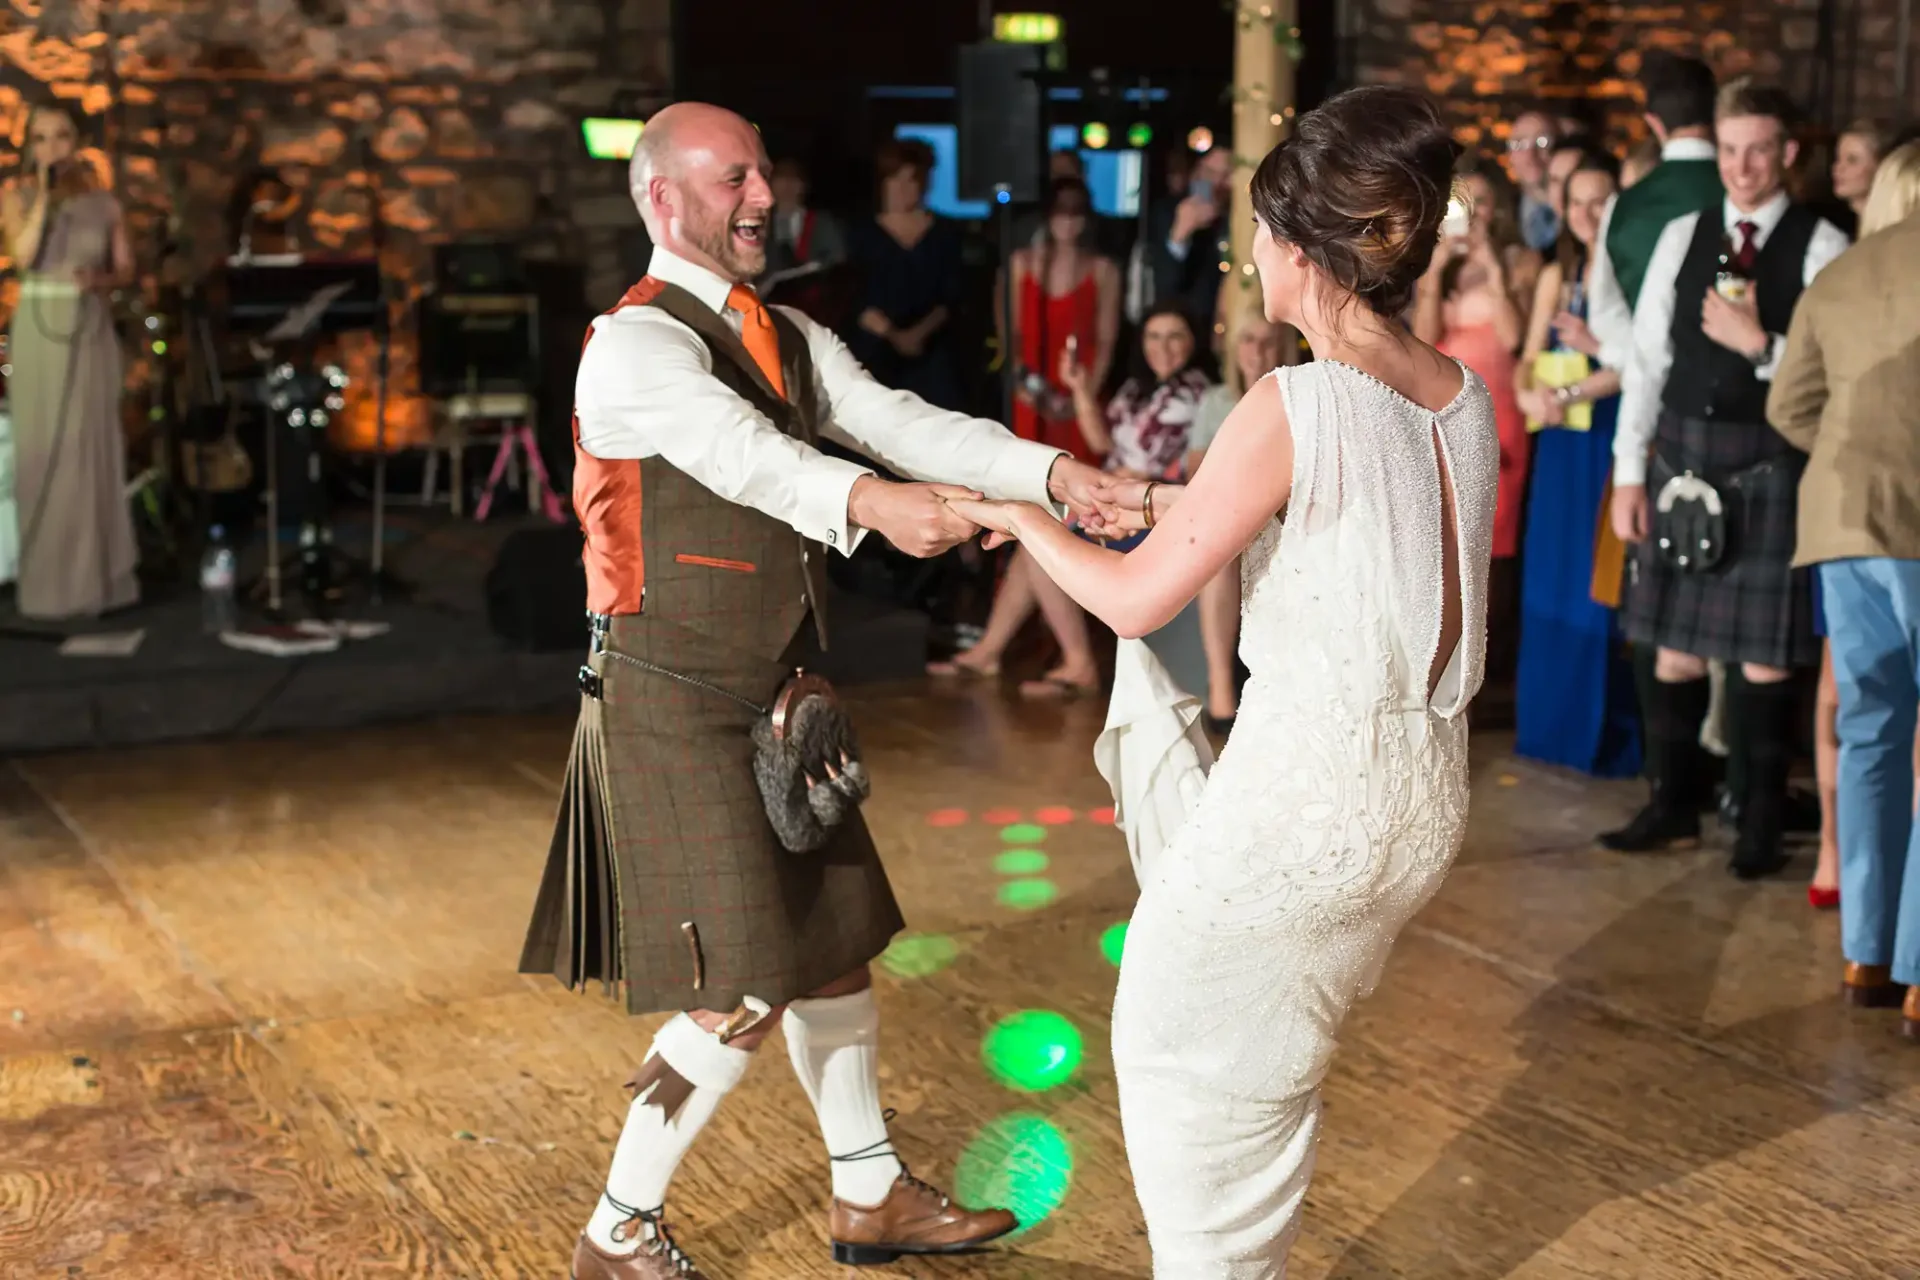 Bride and groom joyfully dancing in a reception hall, with the groom wearing a kilt and the guests watching.